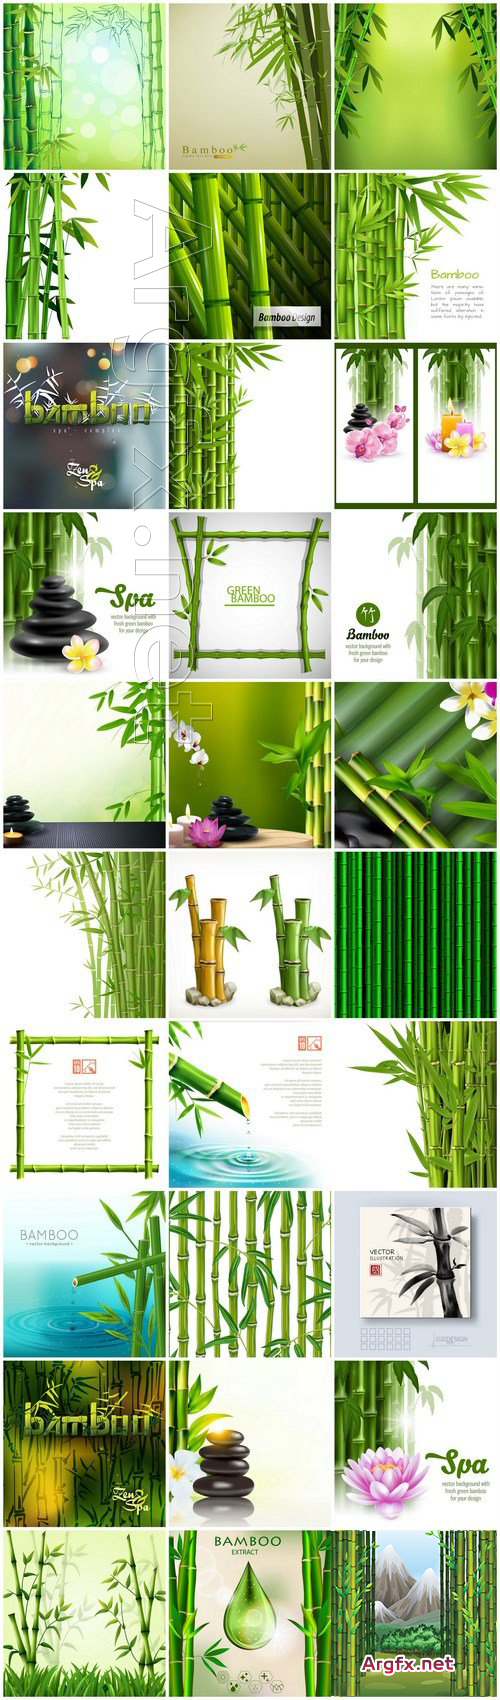 Bamboo Background - 30 Vector